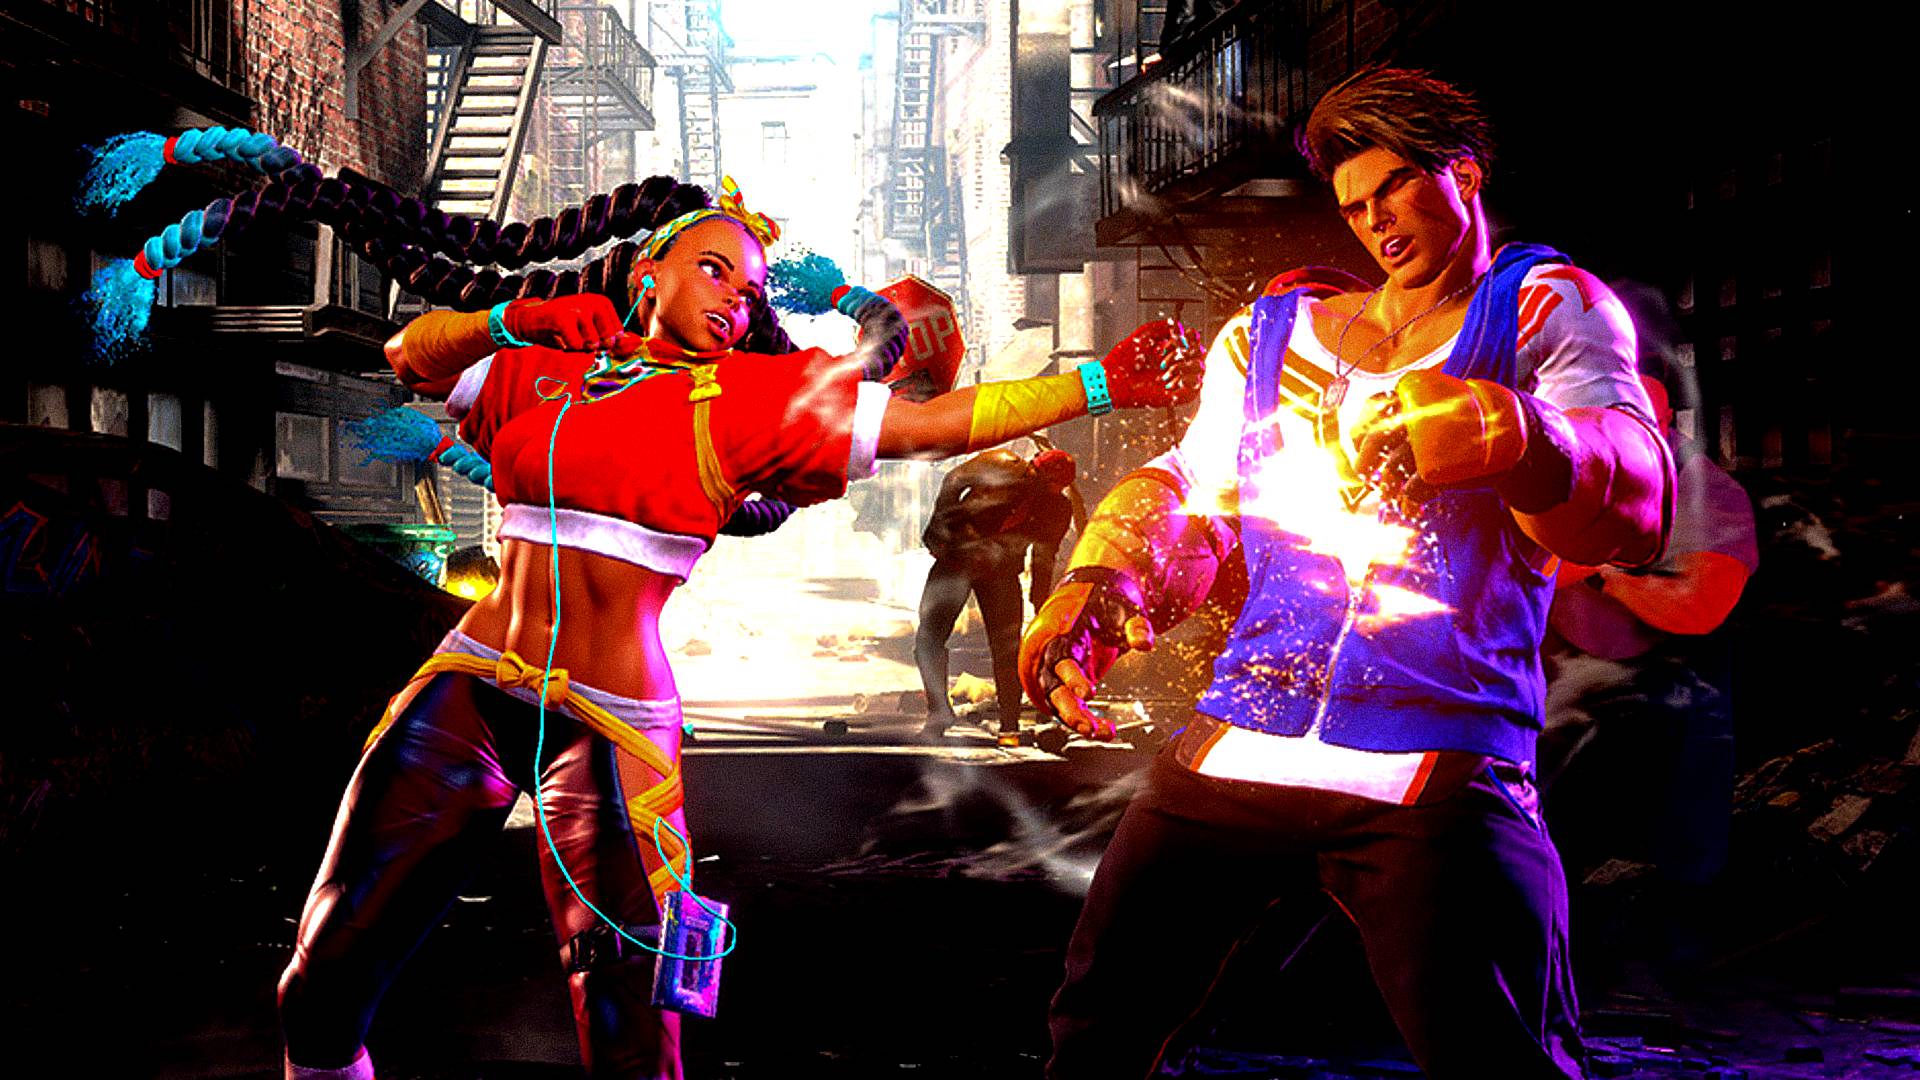 How to sign up for Street Fighter 6 closed beta: Start date